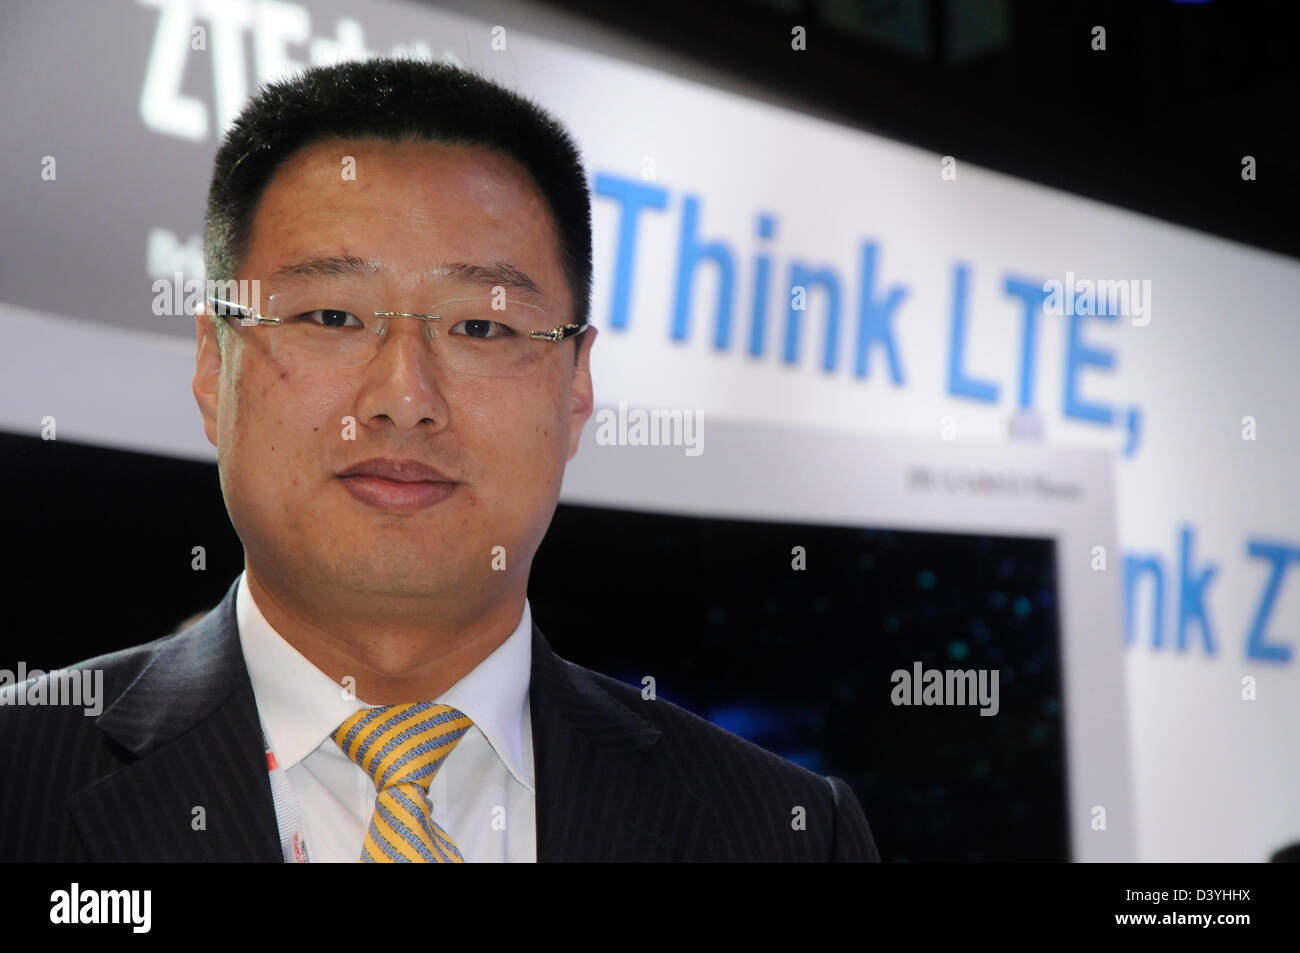 Barcelona, Spain. 26th February 2013. Zhu Jinyun, ZTE's senior vice president for North America and Europe, attends the Mobile World Congress Barcelona 2013. at the ZTE stand .260213. foto:    foto:Rosmi Duaso/Alamy Live News Stock Photo